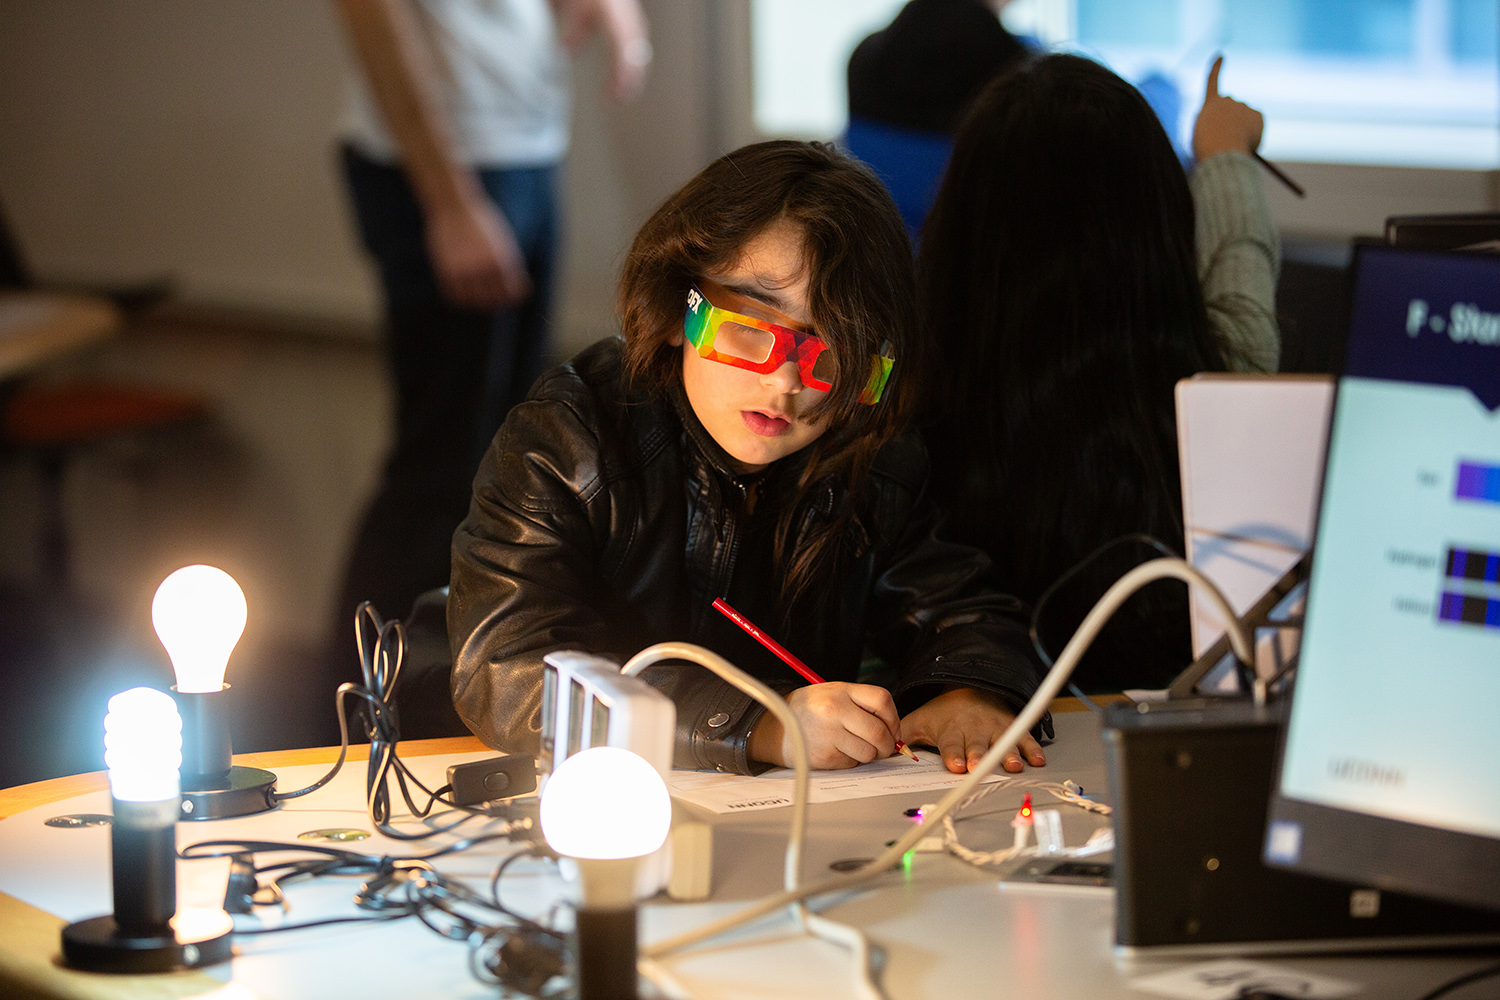 A student wearing glasses writes on a piece of paper during a physics outreach event.